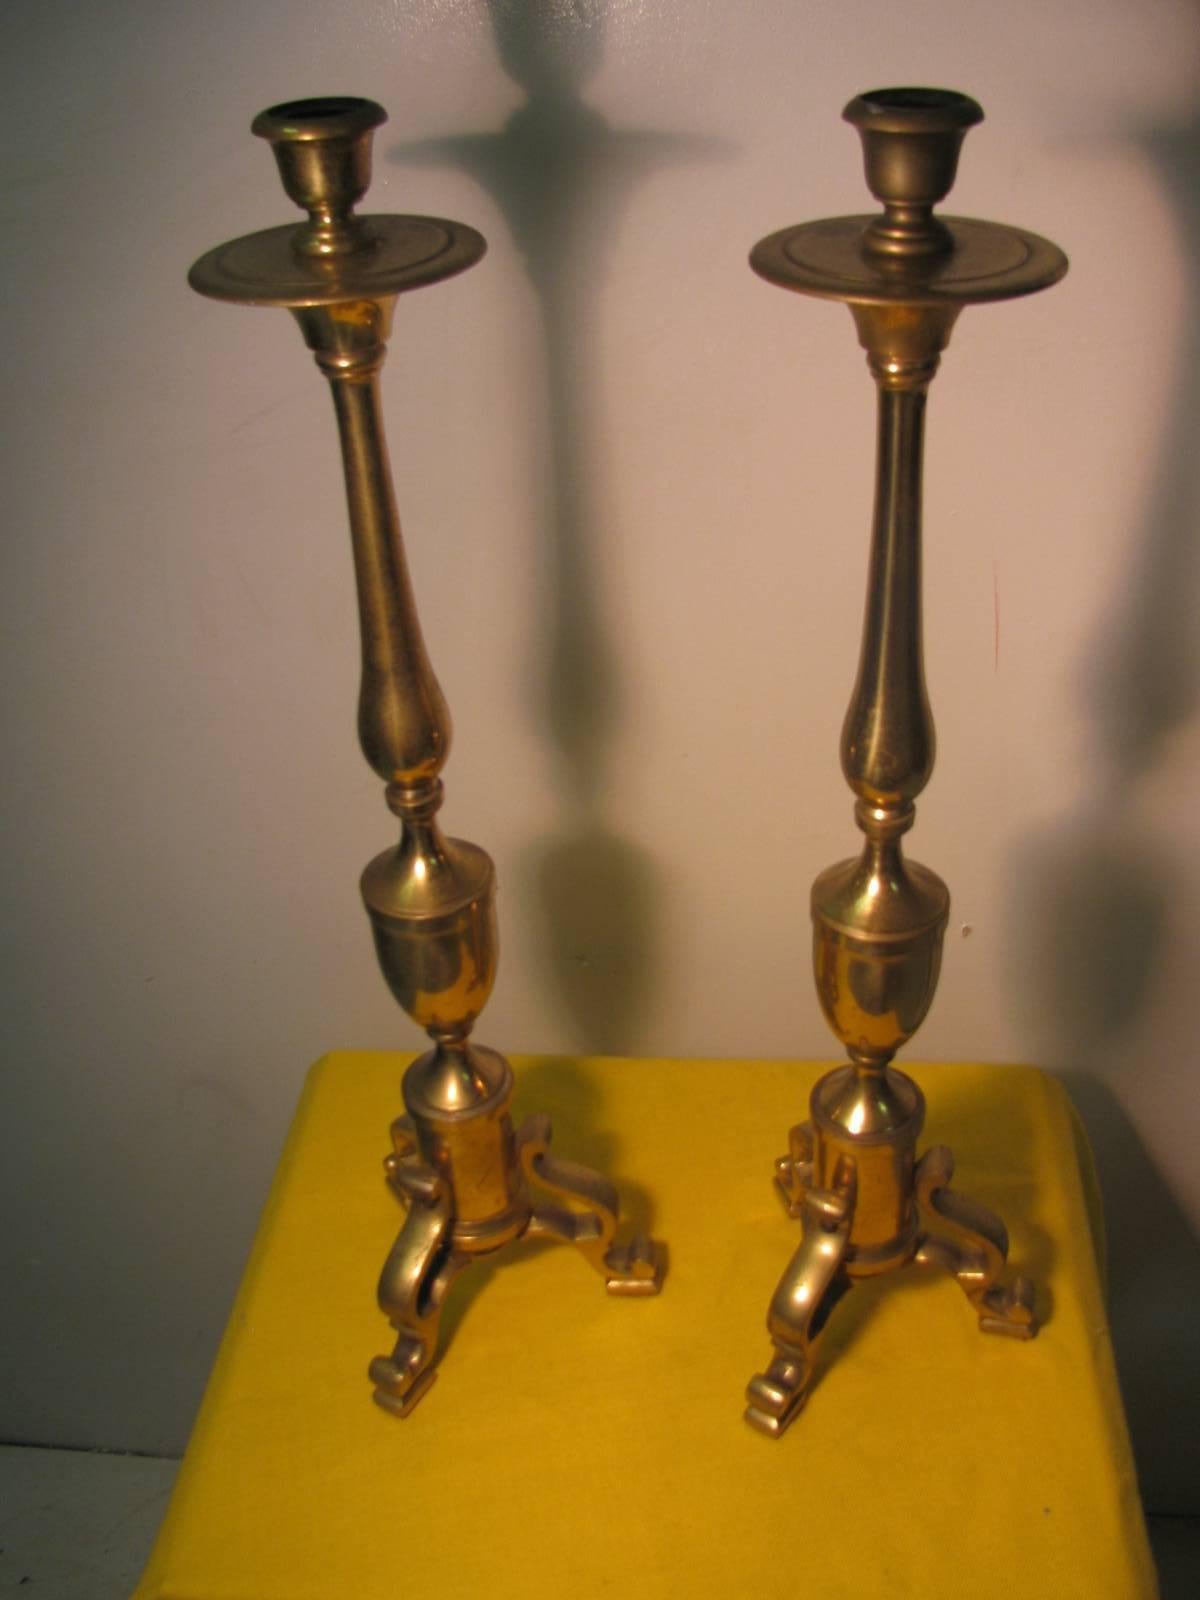 Simple and very elegant, large and tall, (2 ft.) pair of solid brass candleholders. Created with brass sections which fit perfectly. Can be polished or electrified for lamps for a fee.